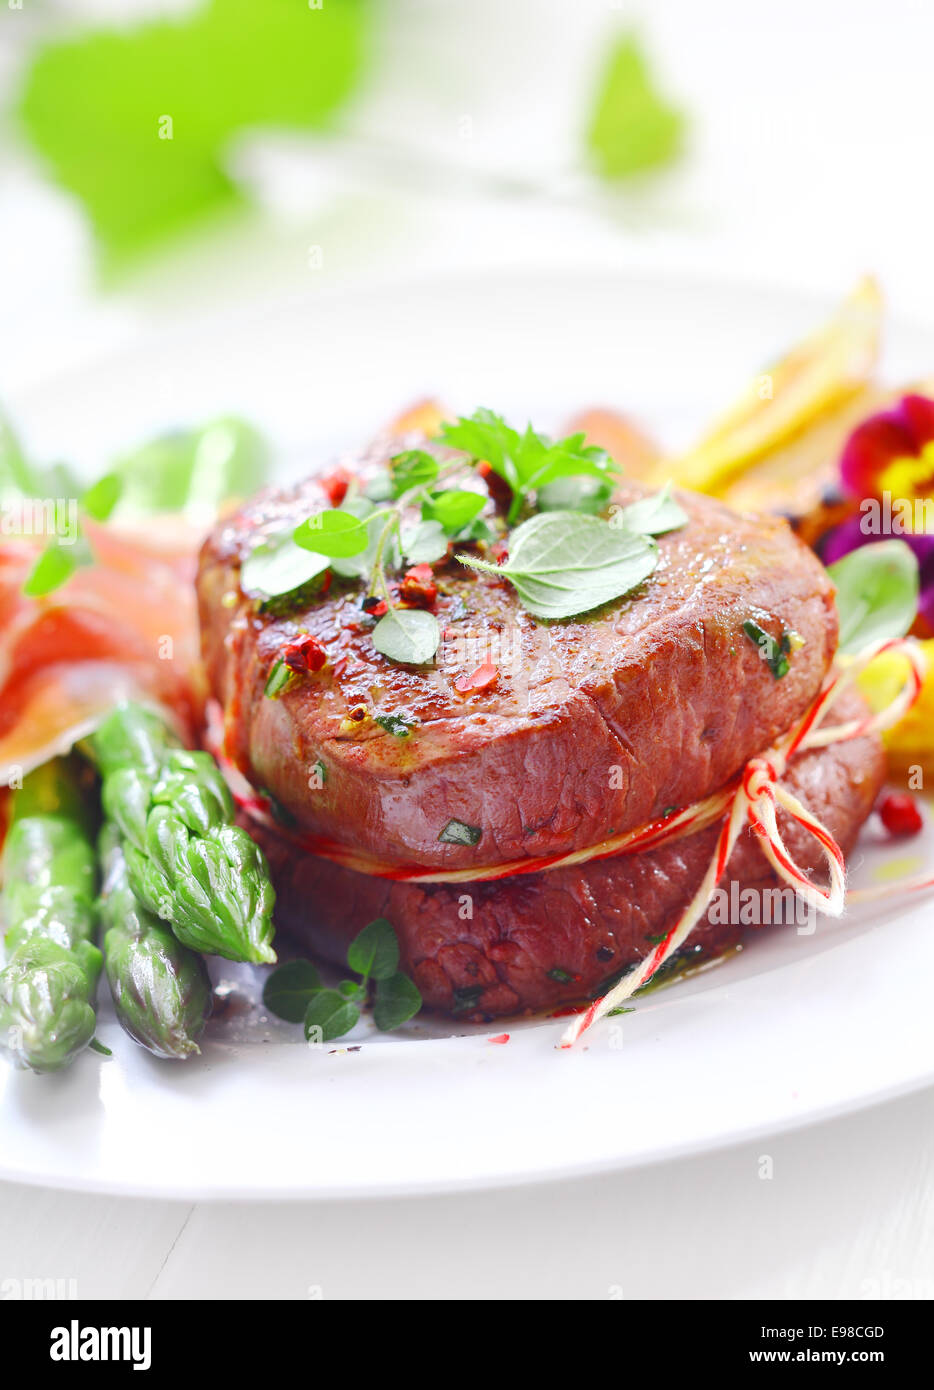 Succulent tender fillet steak medallion tied with string and served with fresh green asparagus spears wrapped in thinly sliced ham or bacon Stock Photo